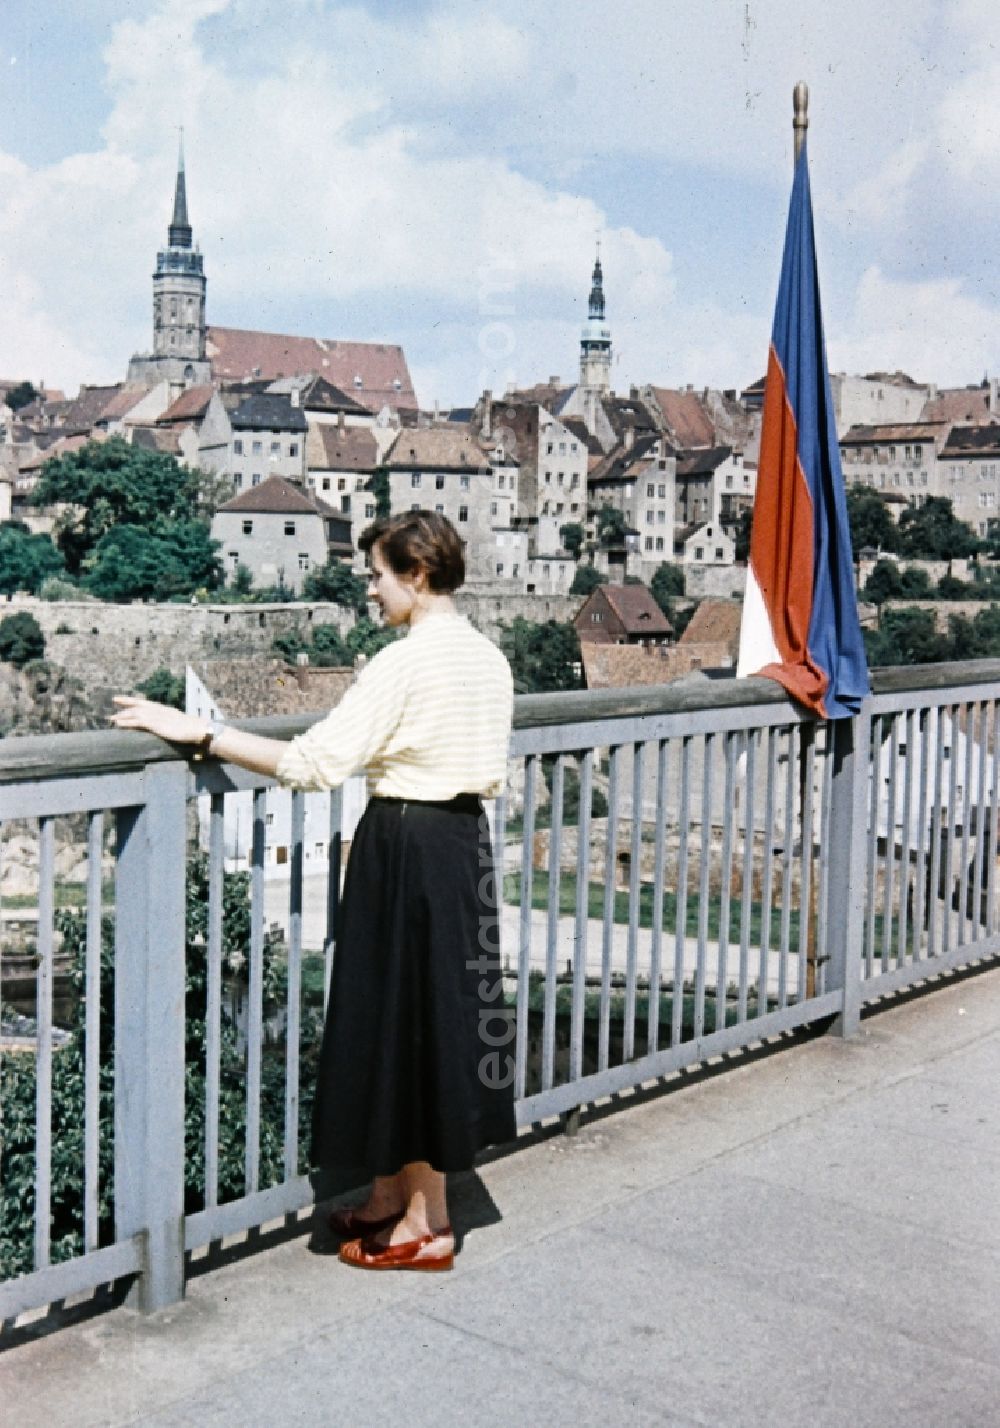 GDR photo archive: Bautzen - Woman on bridge on historic old town in the center in Bautzen in the state Saxony on the territory of the former GDR, German Democratic Republic